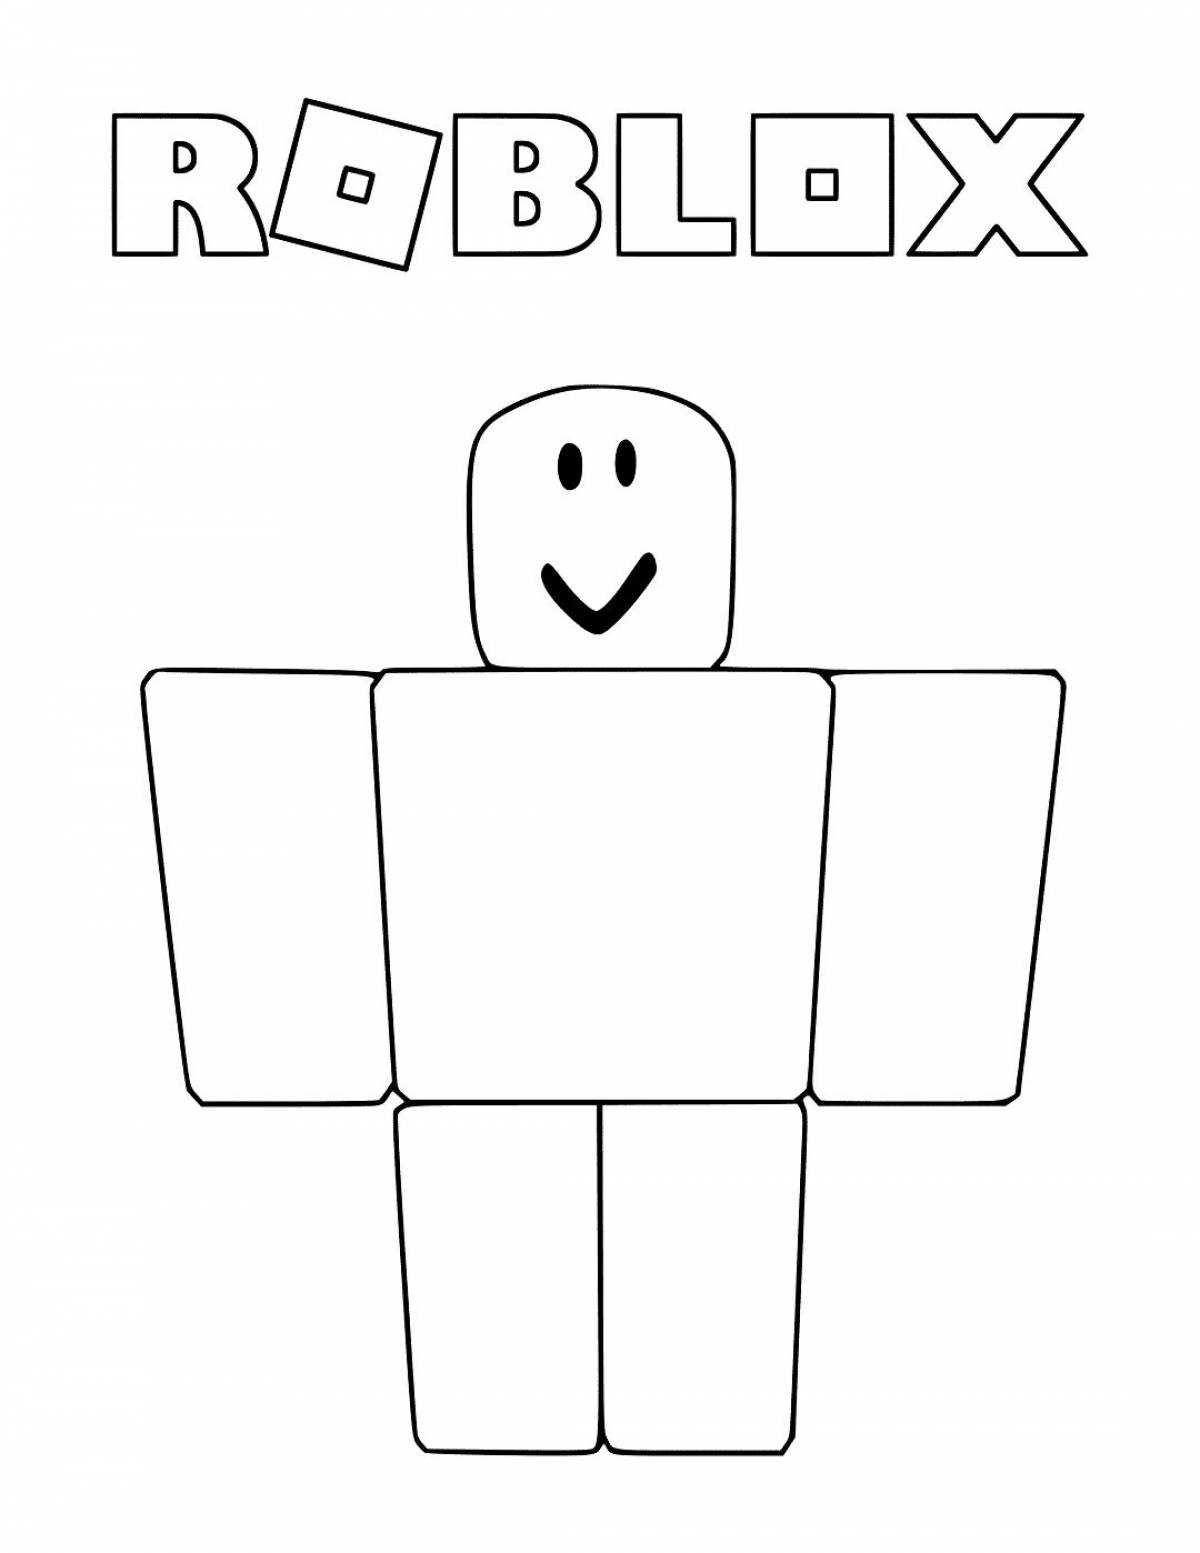 Robloxers #1